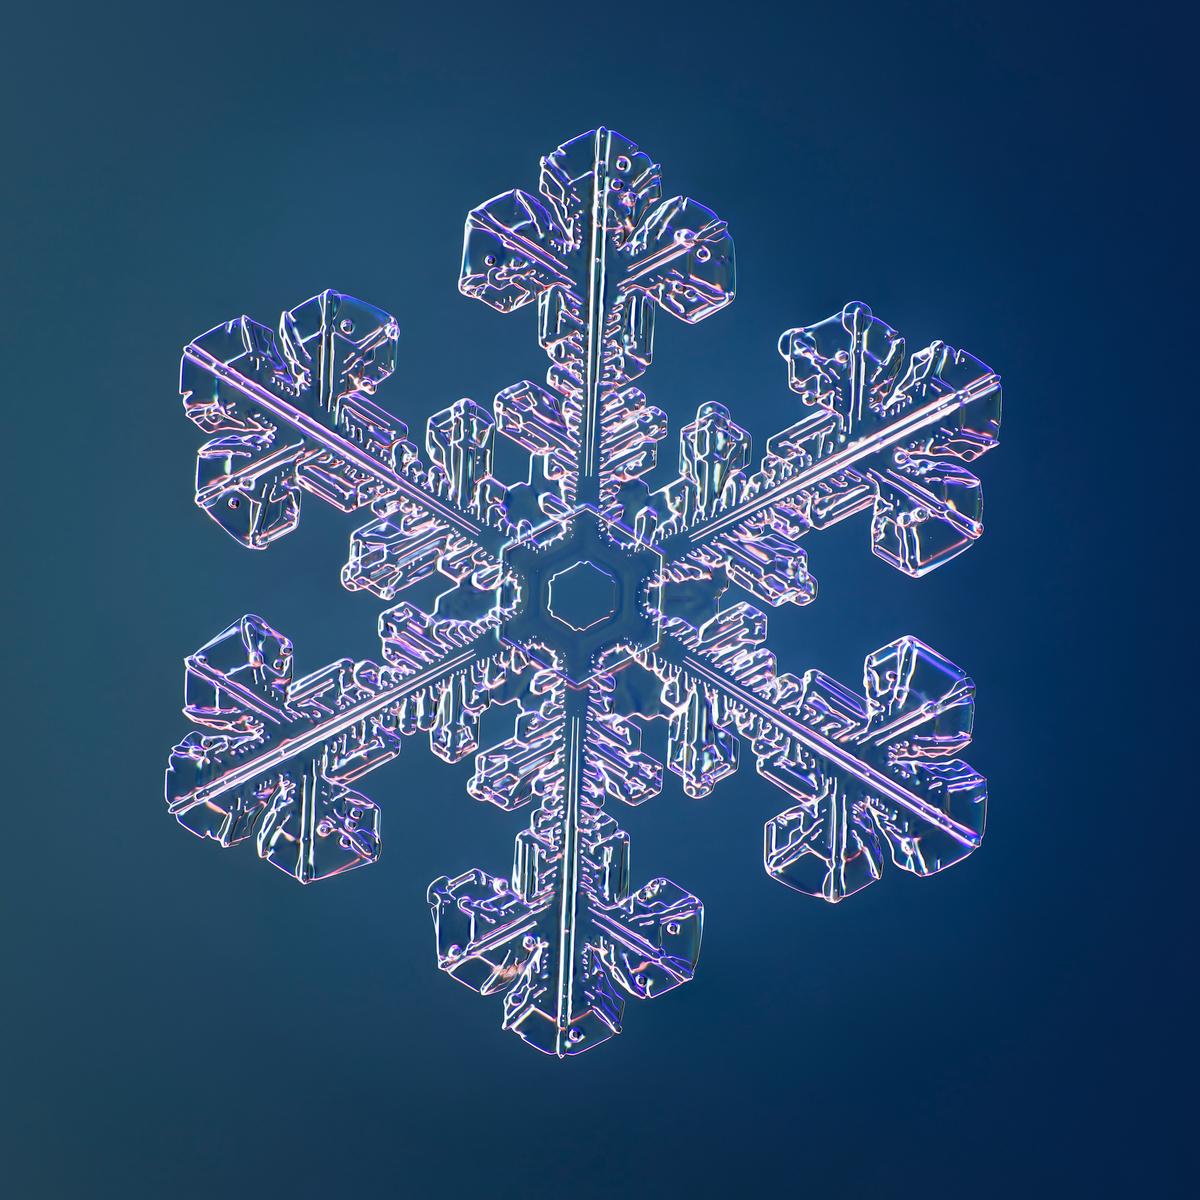 A snowflake photographed by Nathan Myhrvold. (Nathan Myhrvold / <a href="https://modernistcuisinegallery.com/">Modernist Cuisine Gallery, LLC</a>)